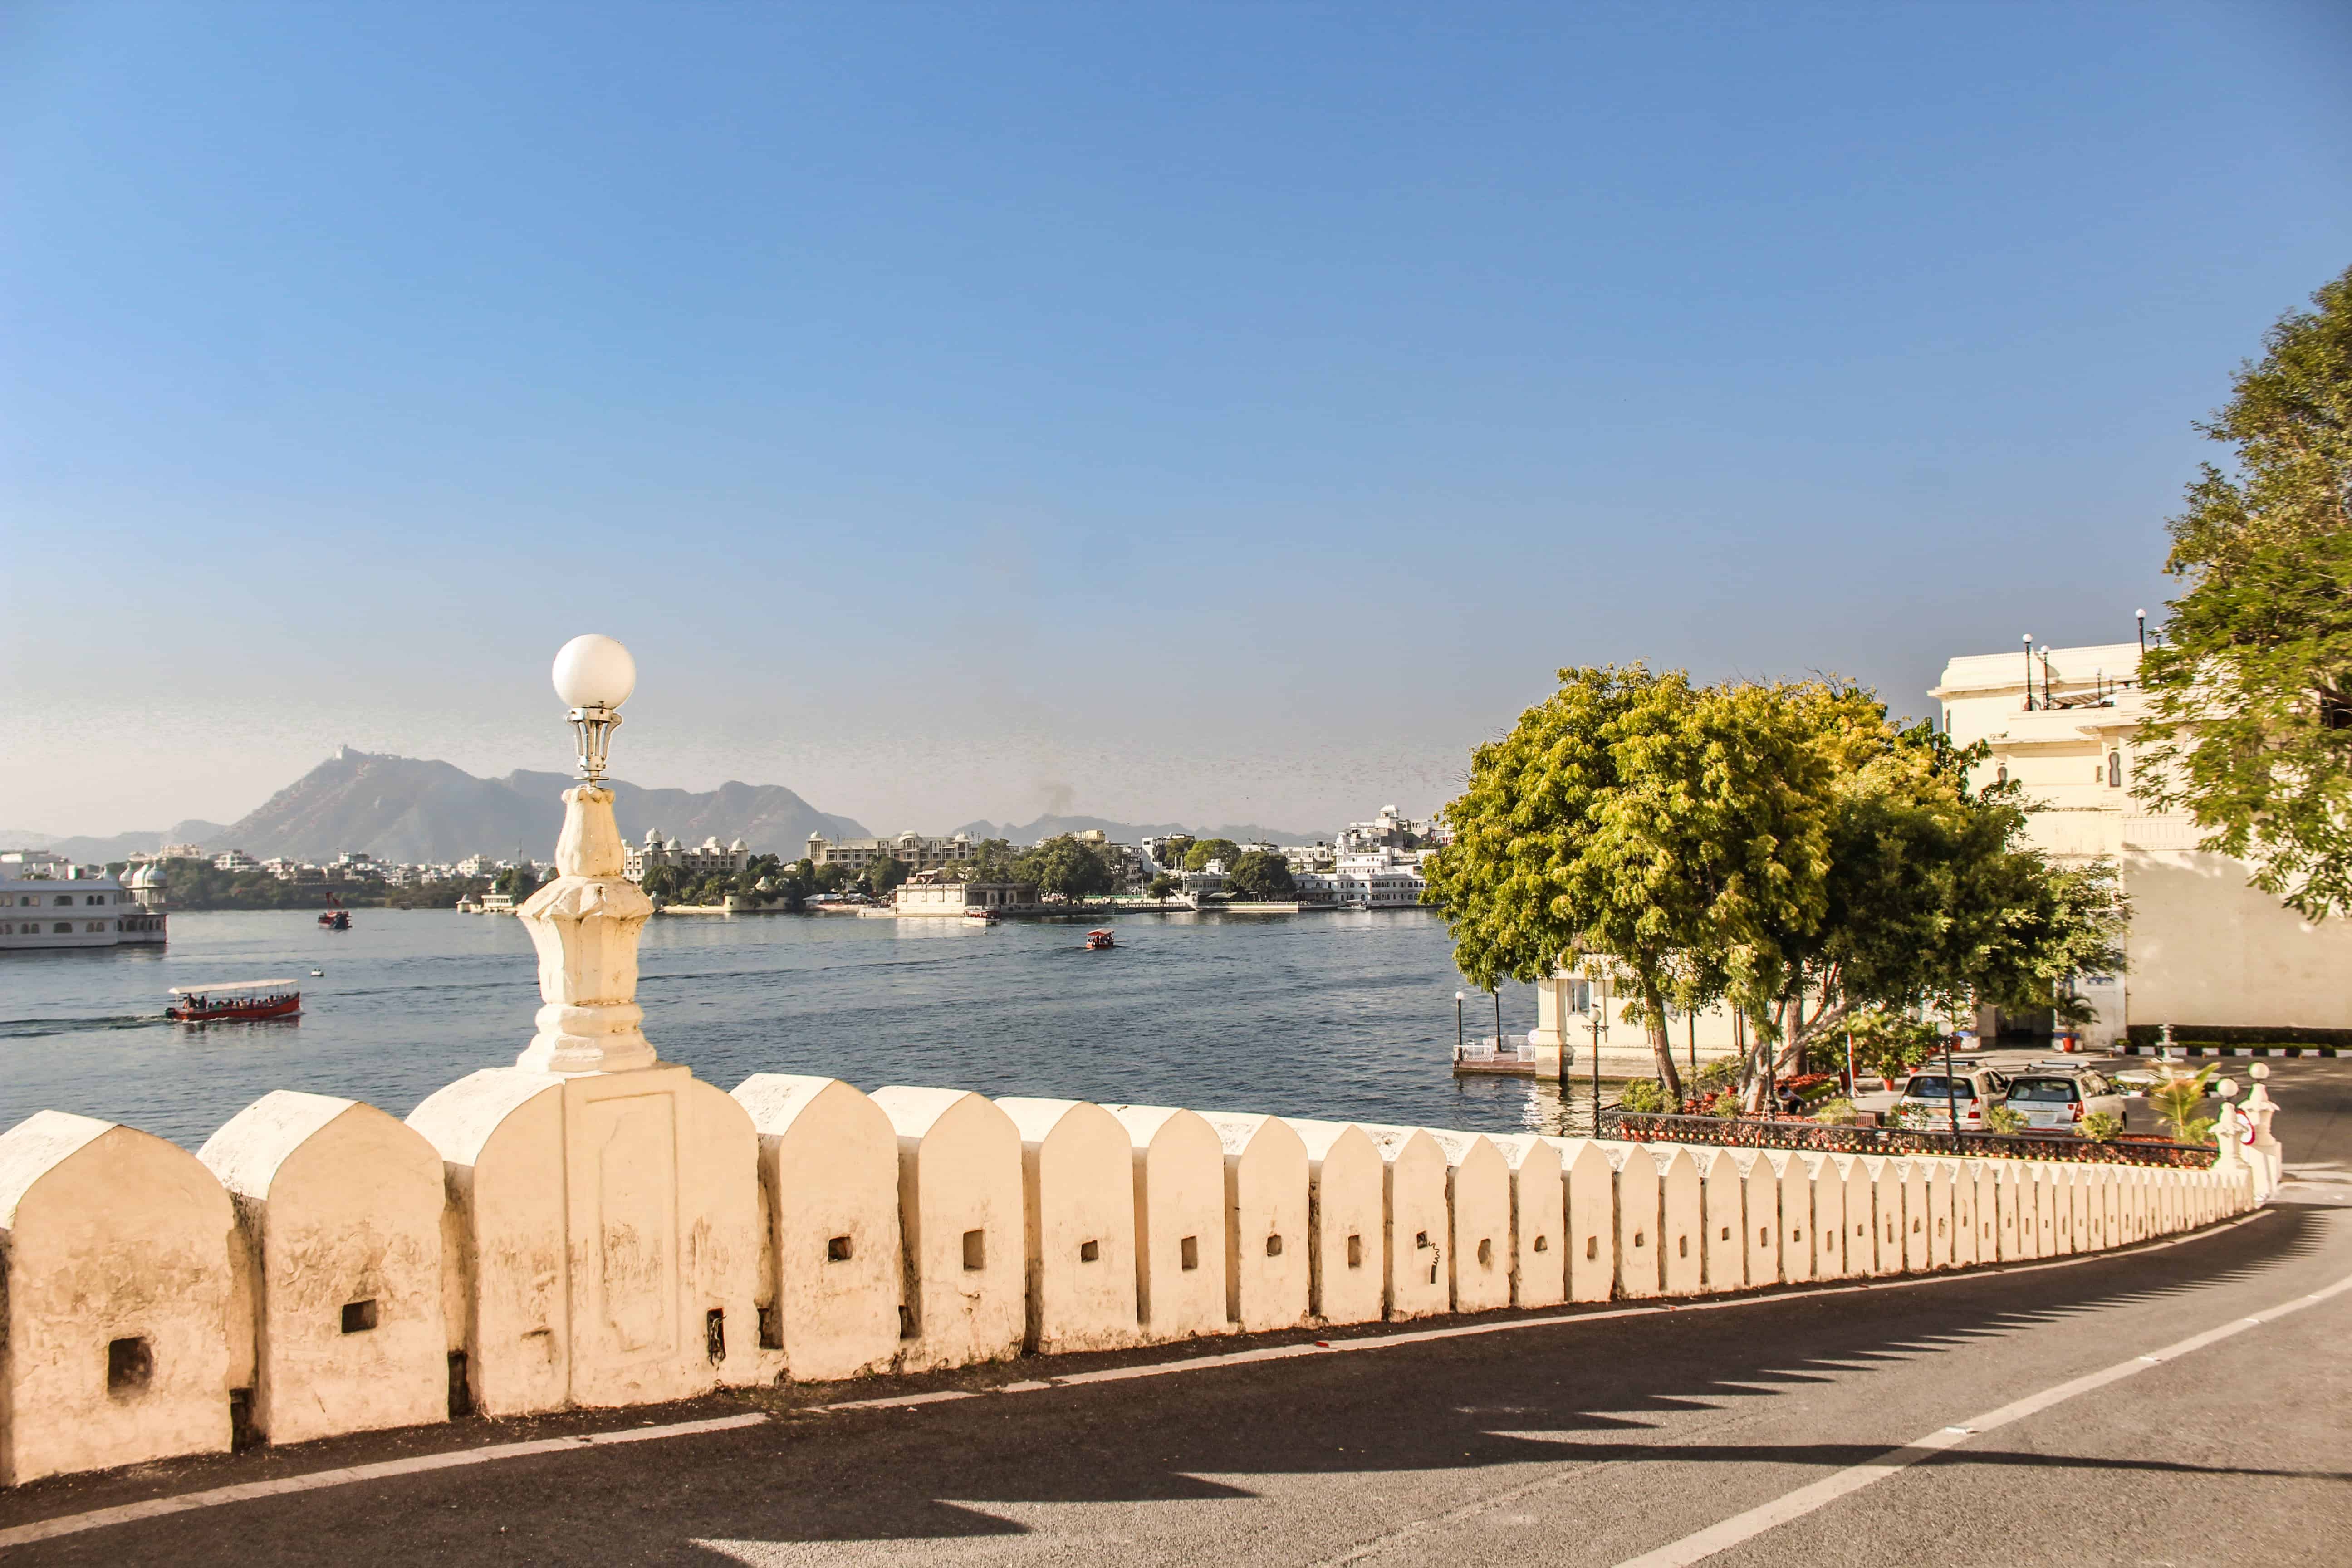 City Palace Udaipur- Most iconic and one of the best places to visit in Udaipur